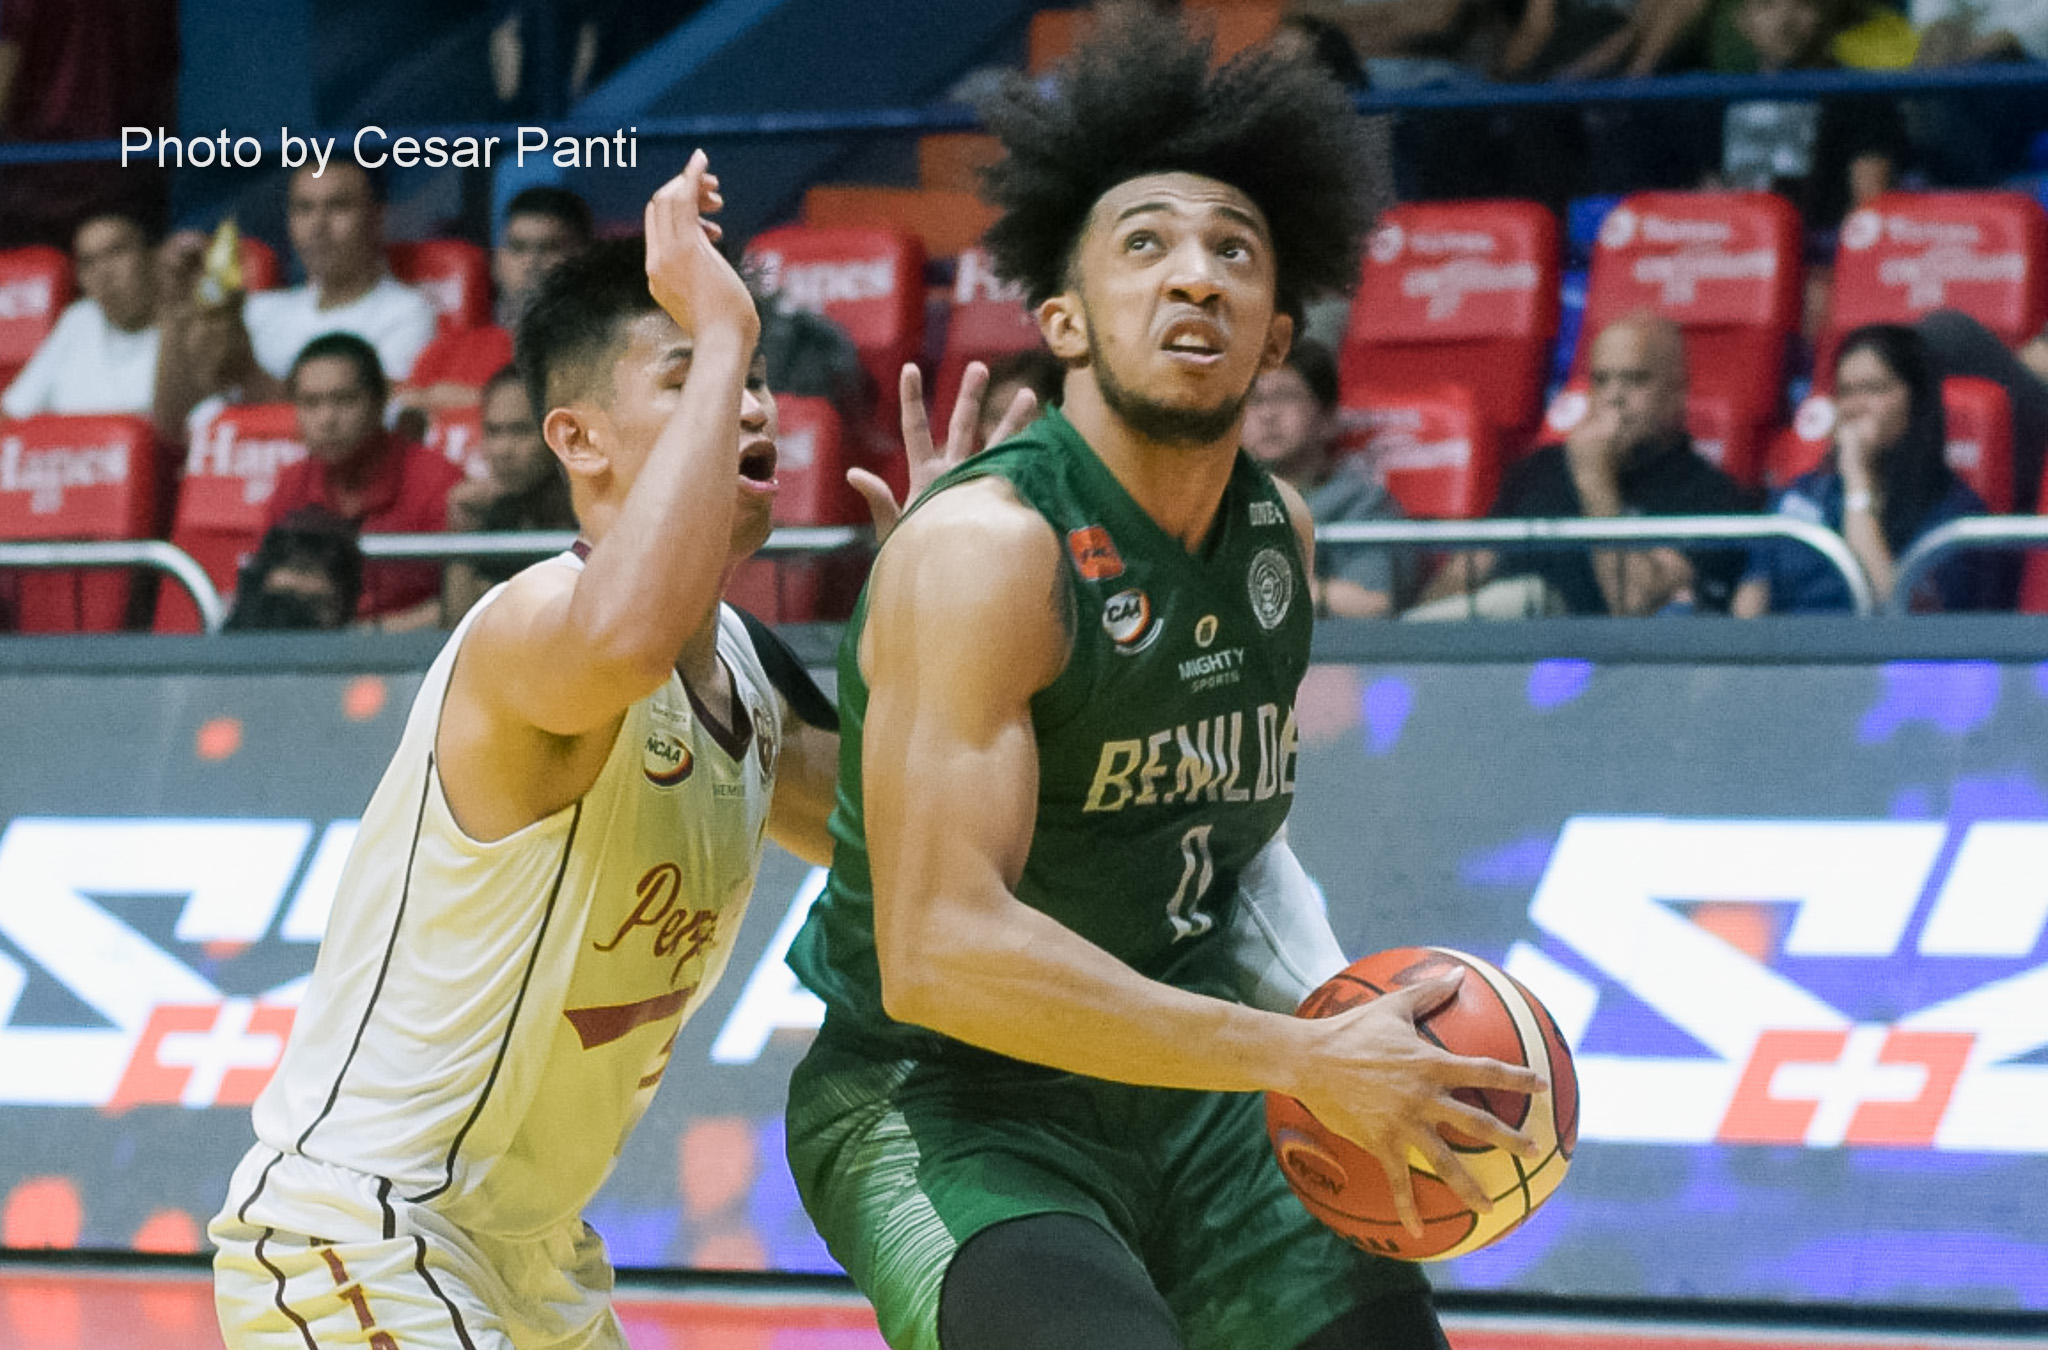 Hot-shooting St. Benilde downs Perpetual for third spot